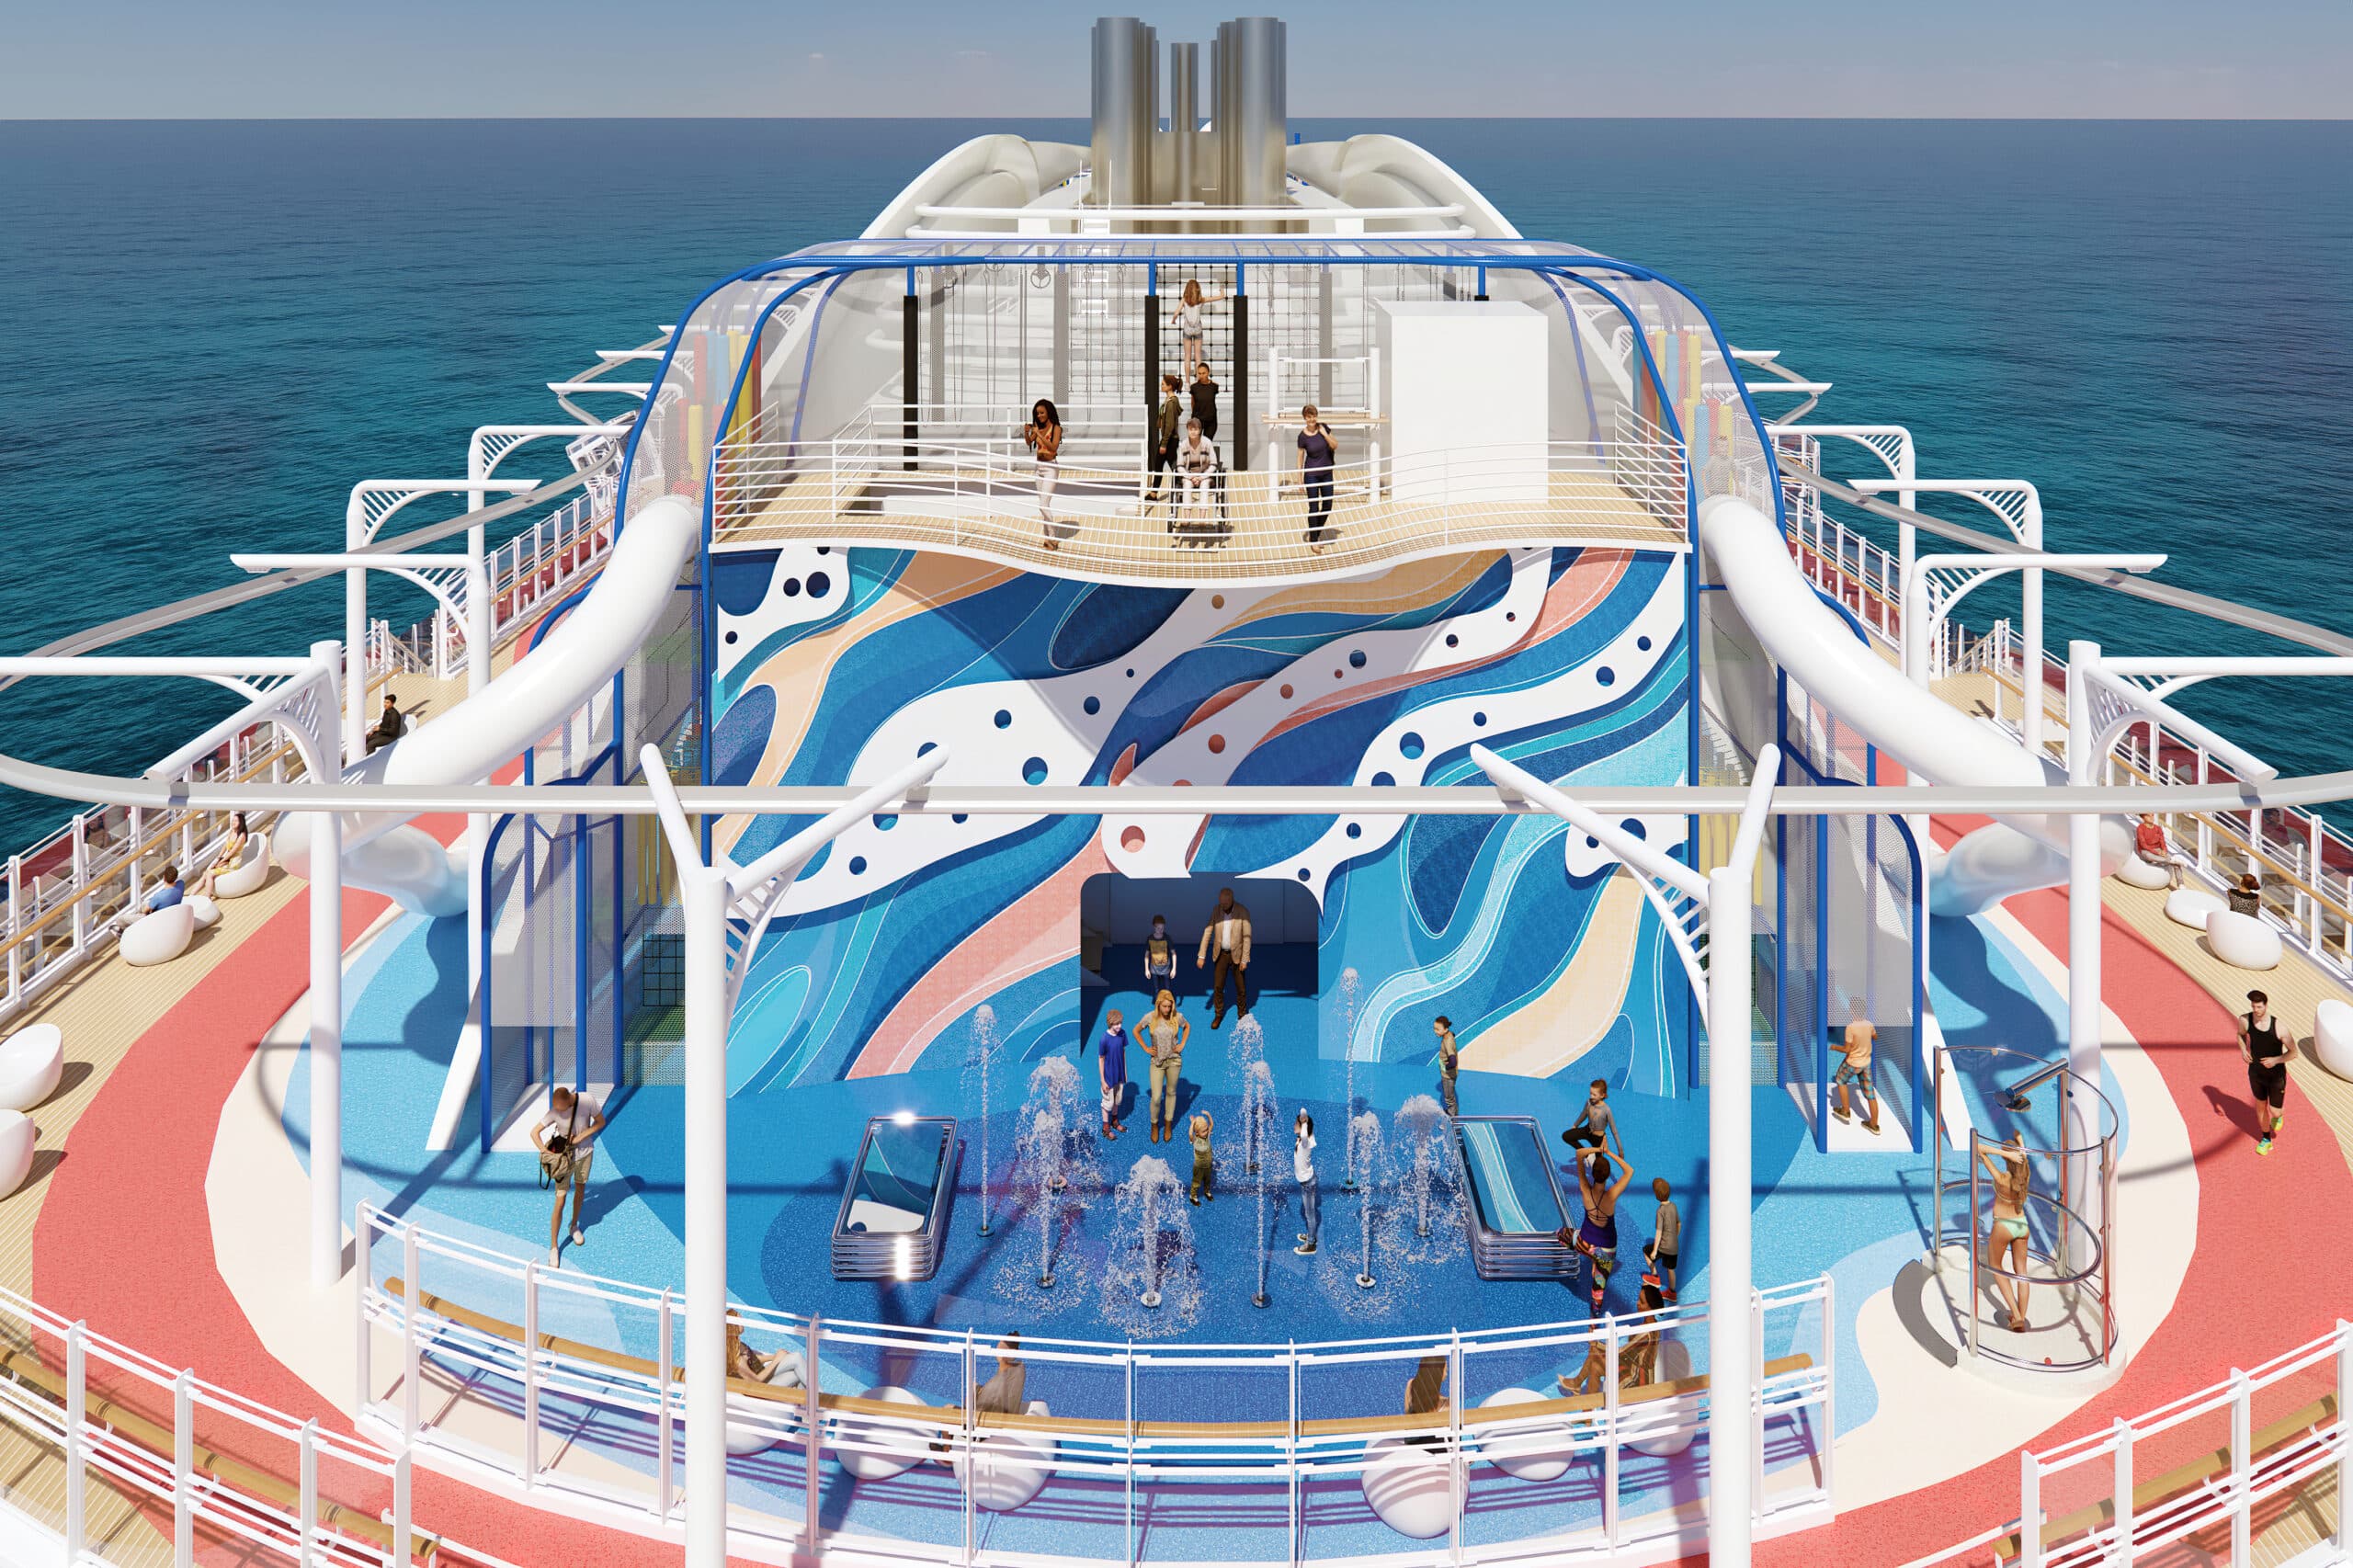 Park19, The Lookout, and the Splash Pad on Sun Princess 